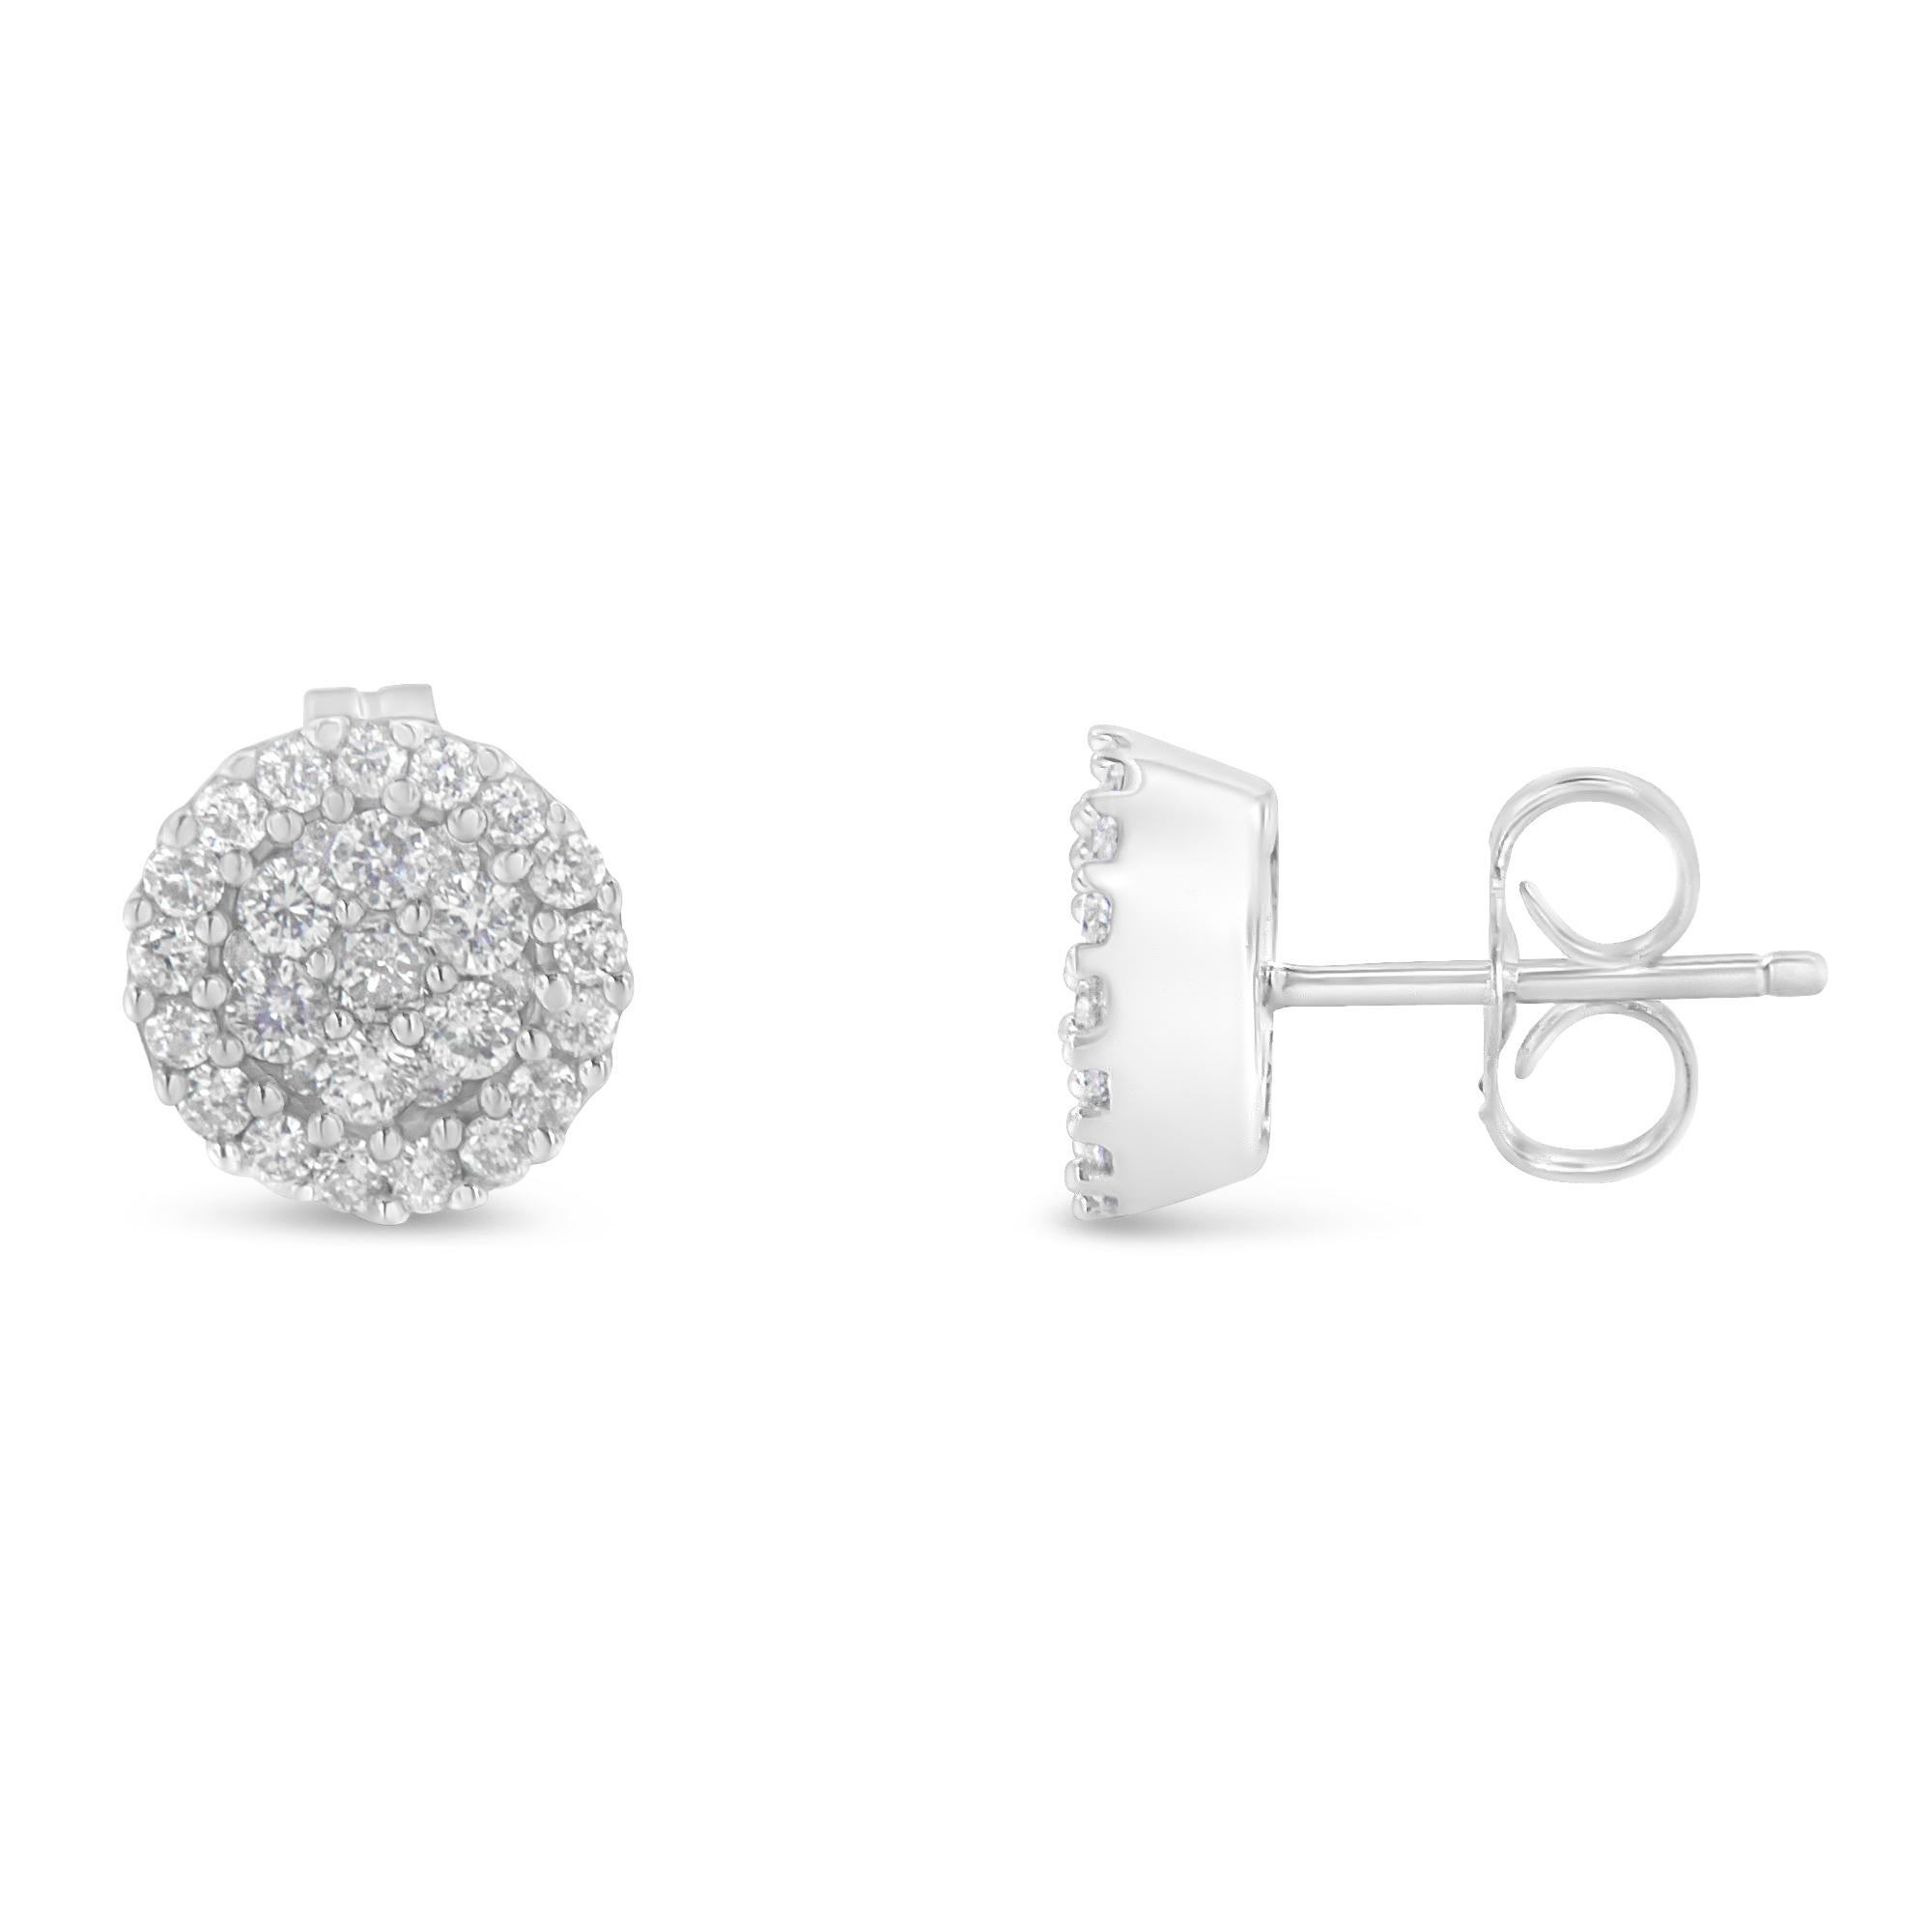 A stunning pair of gold and diamond stud earrings. These floral earrings are prong-set with 60 round-cut diamonds clustered together to create a magnificent diamond look. The diamonds, weighing a total weight of 1/2 carat, are set in lustrous 14k